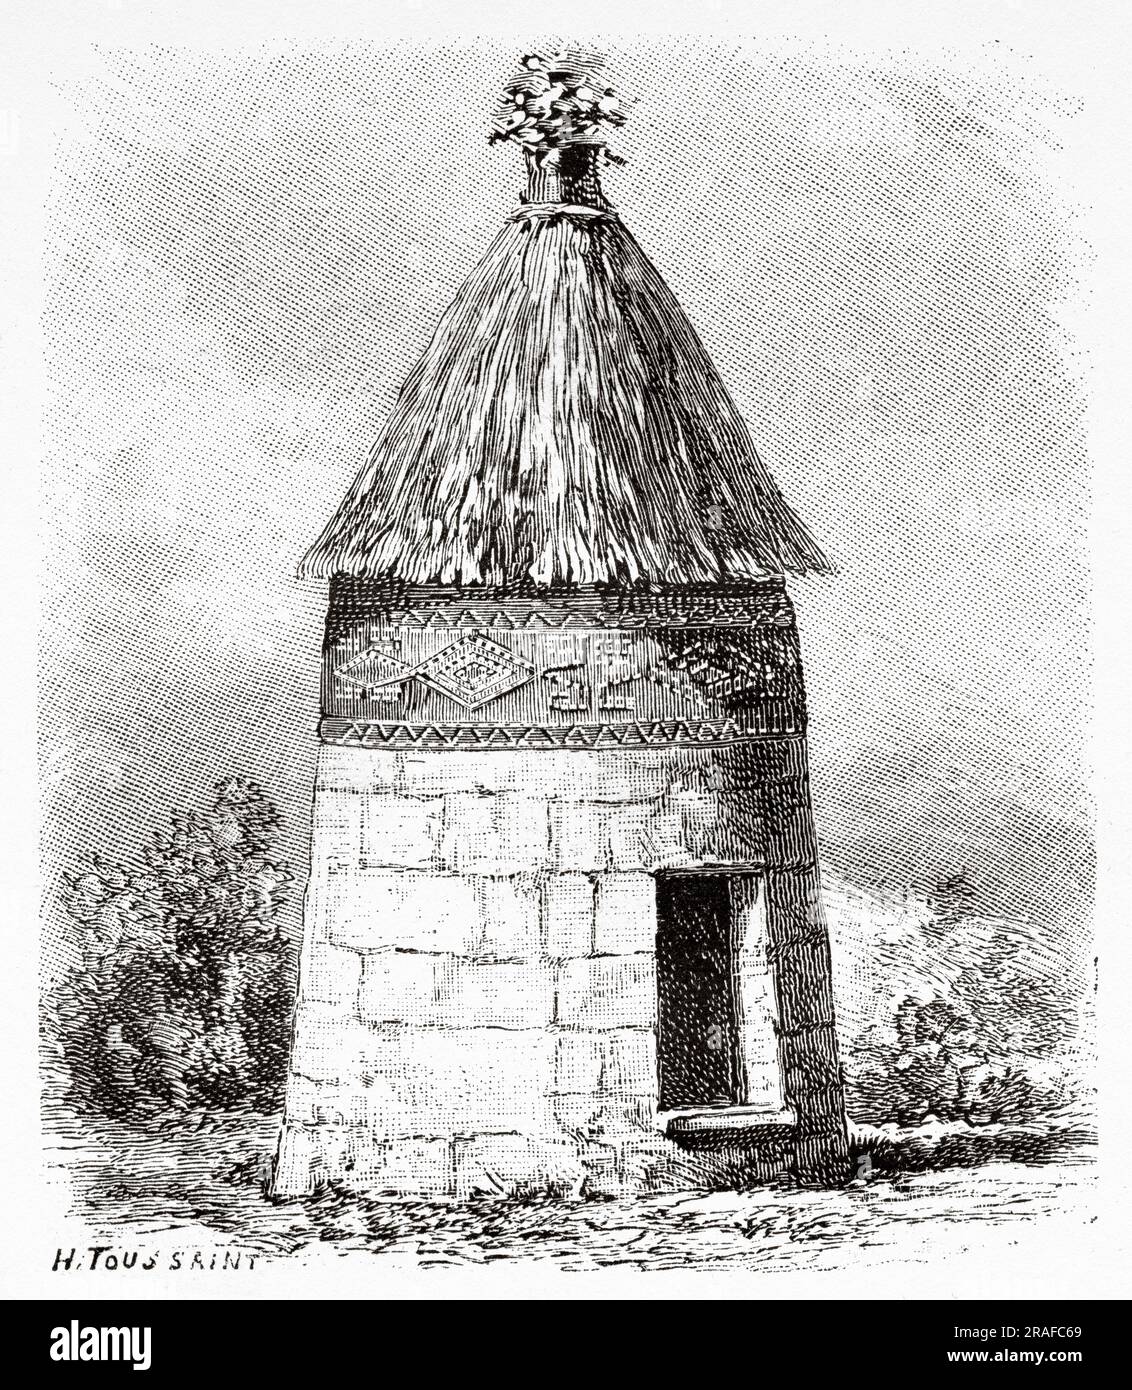 House with architectural details of Chachapoya Andean people. Peru, South America. Amazon and mountain ranges by Charles Wiener Mahler, 1879-1882. Old 19th century engraving from Le Tour du Monde 1906 Stock Photo